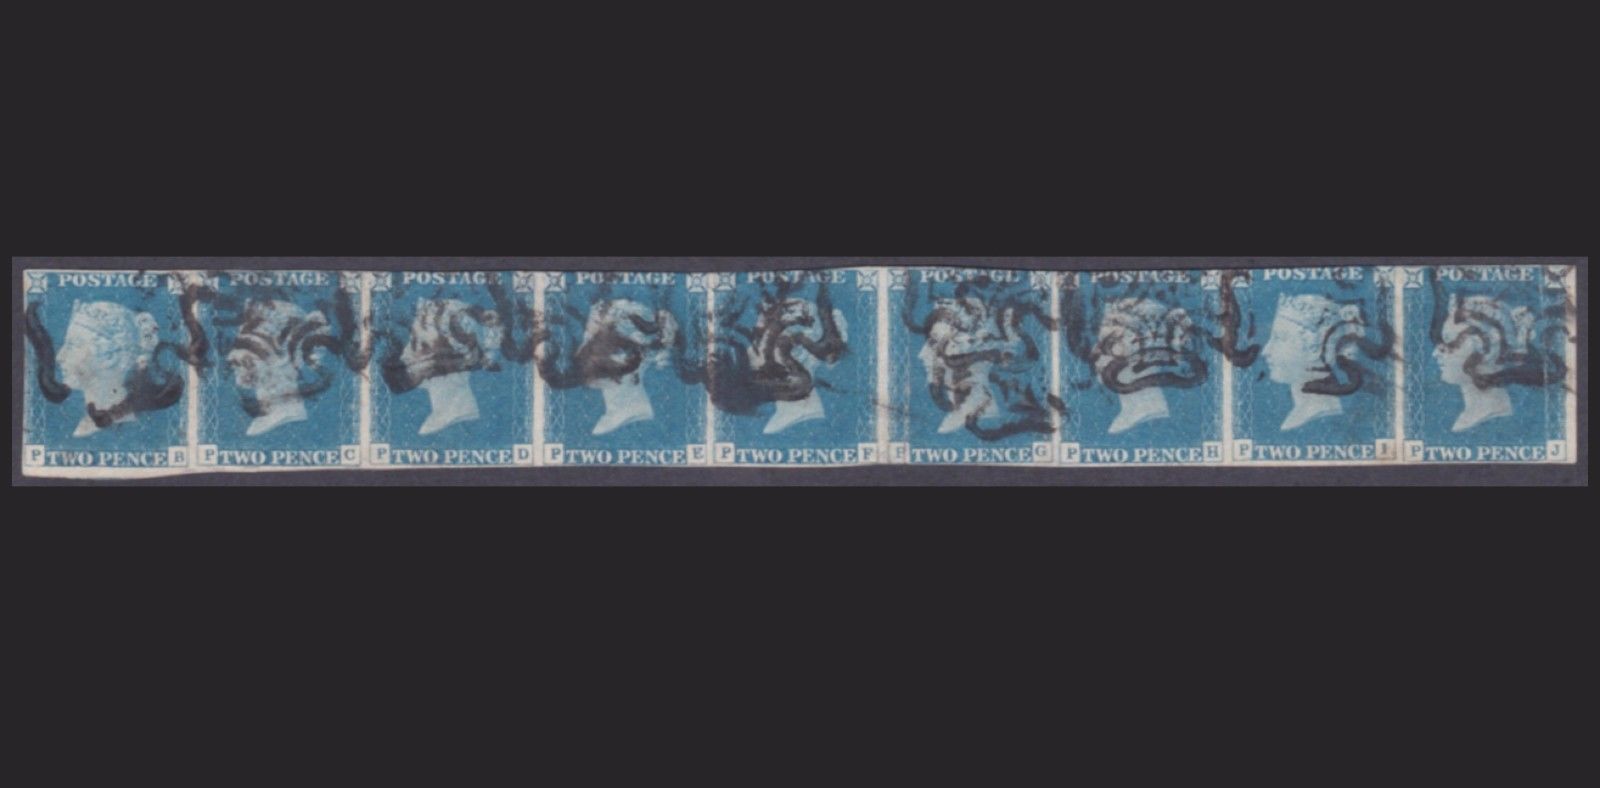 GREAT BRITAIN UK QV 2d BLUE PLATE 1 SUPERB STRIP OF 9 CAT 8100 FOR JUST SINGLES